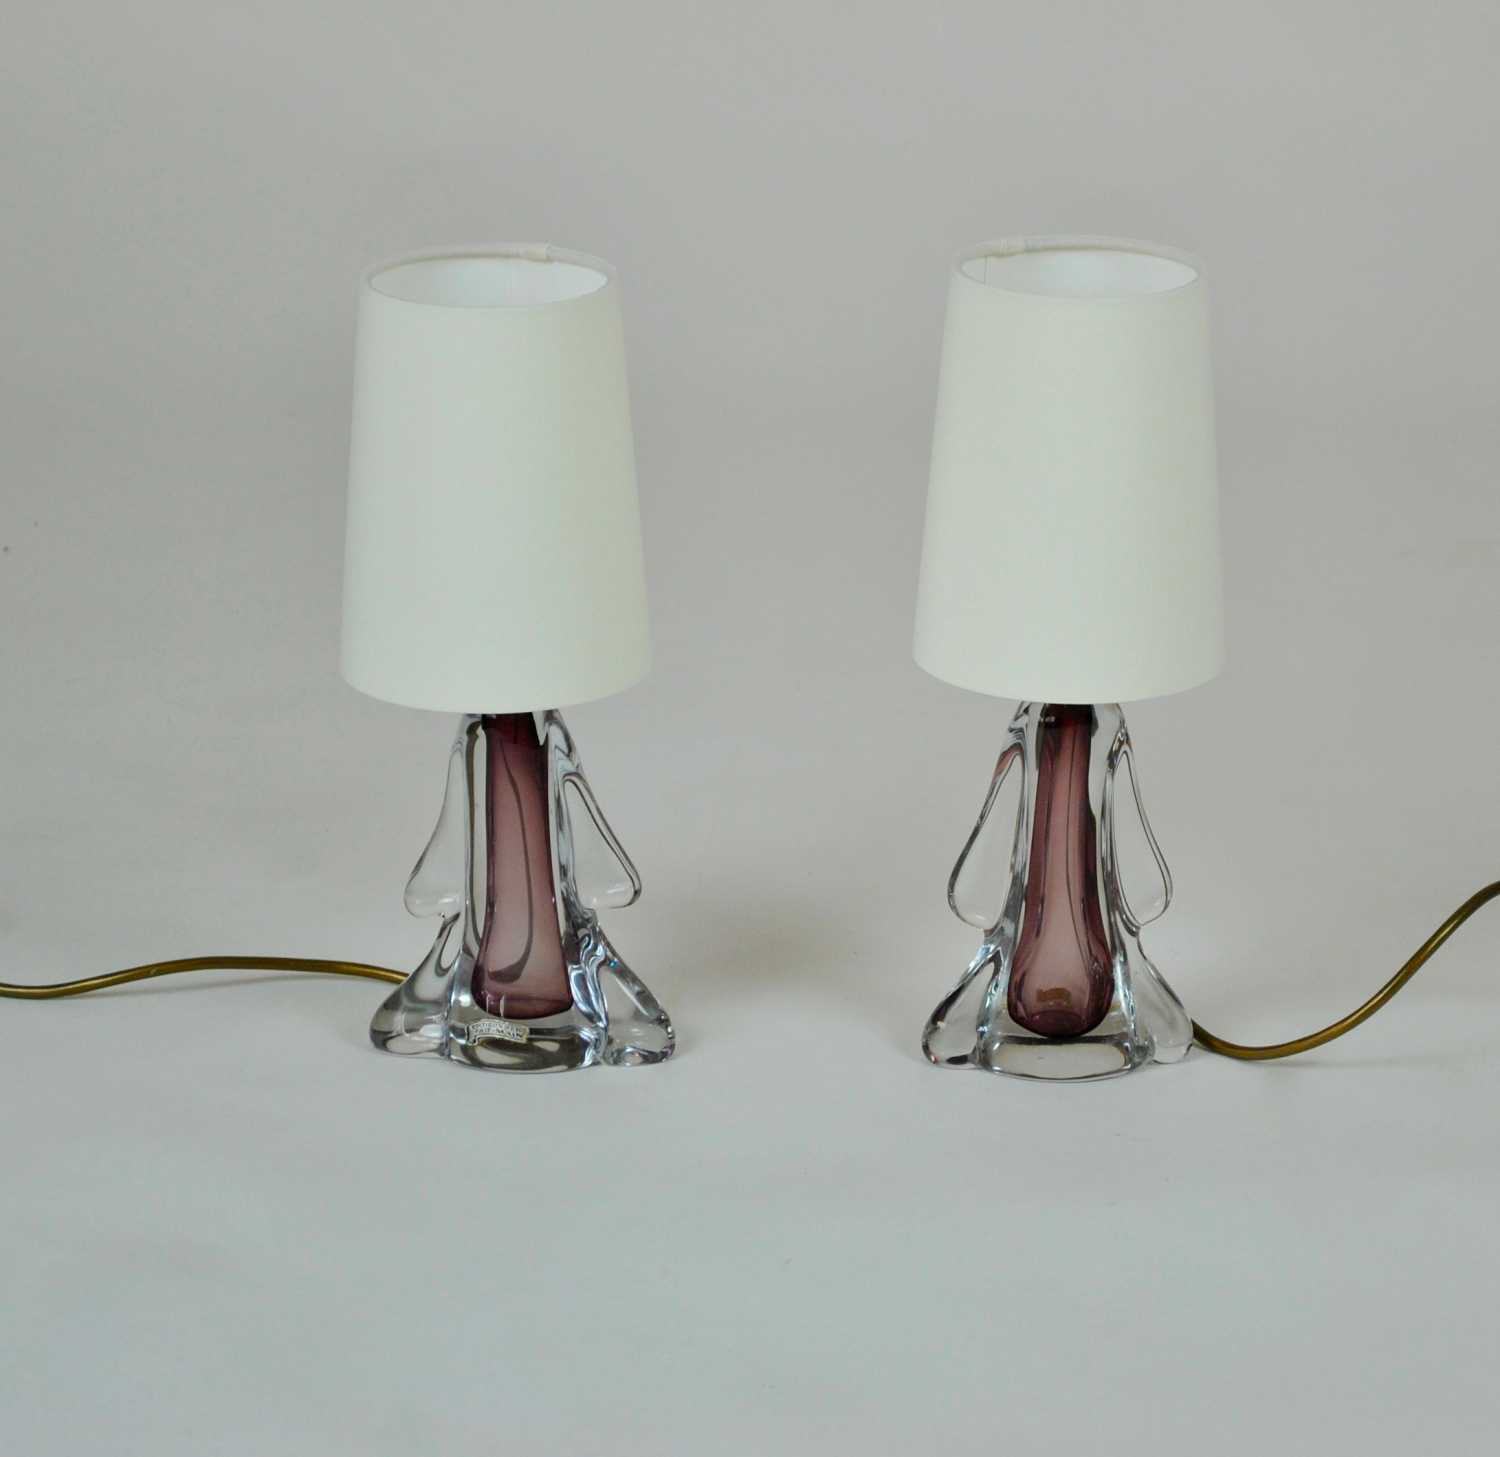 Lilac glass bedside lamps